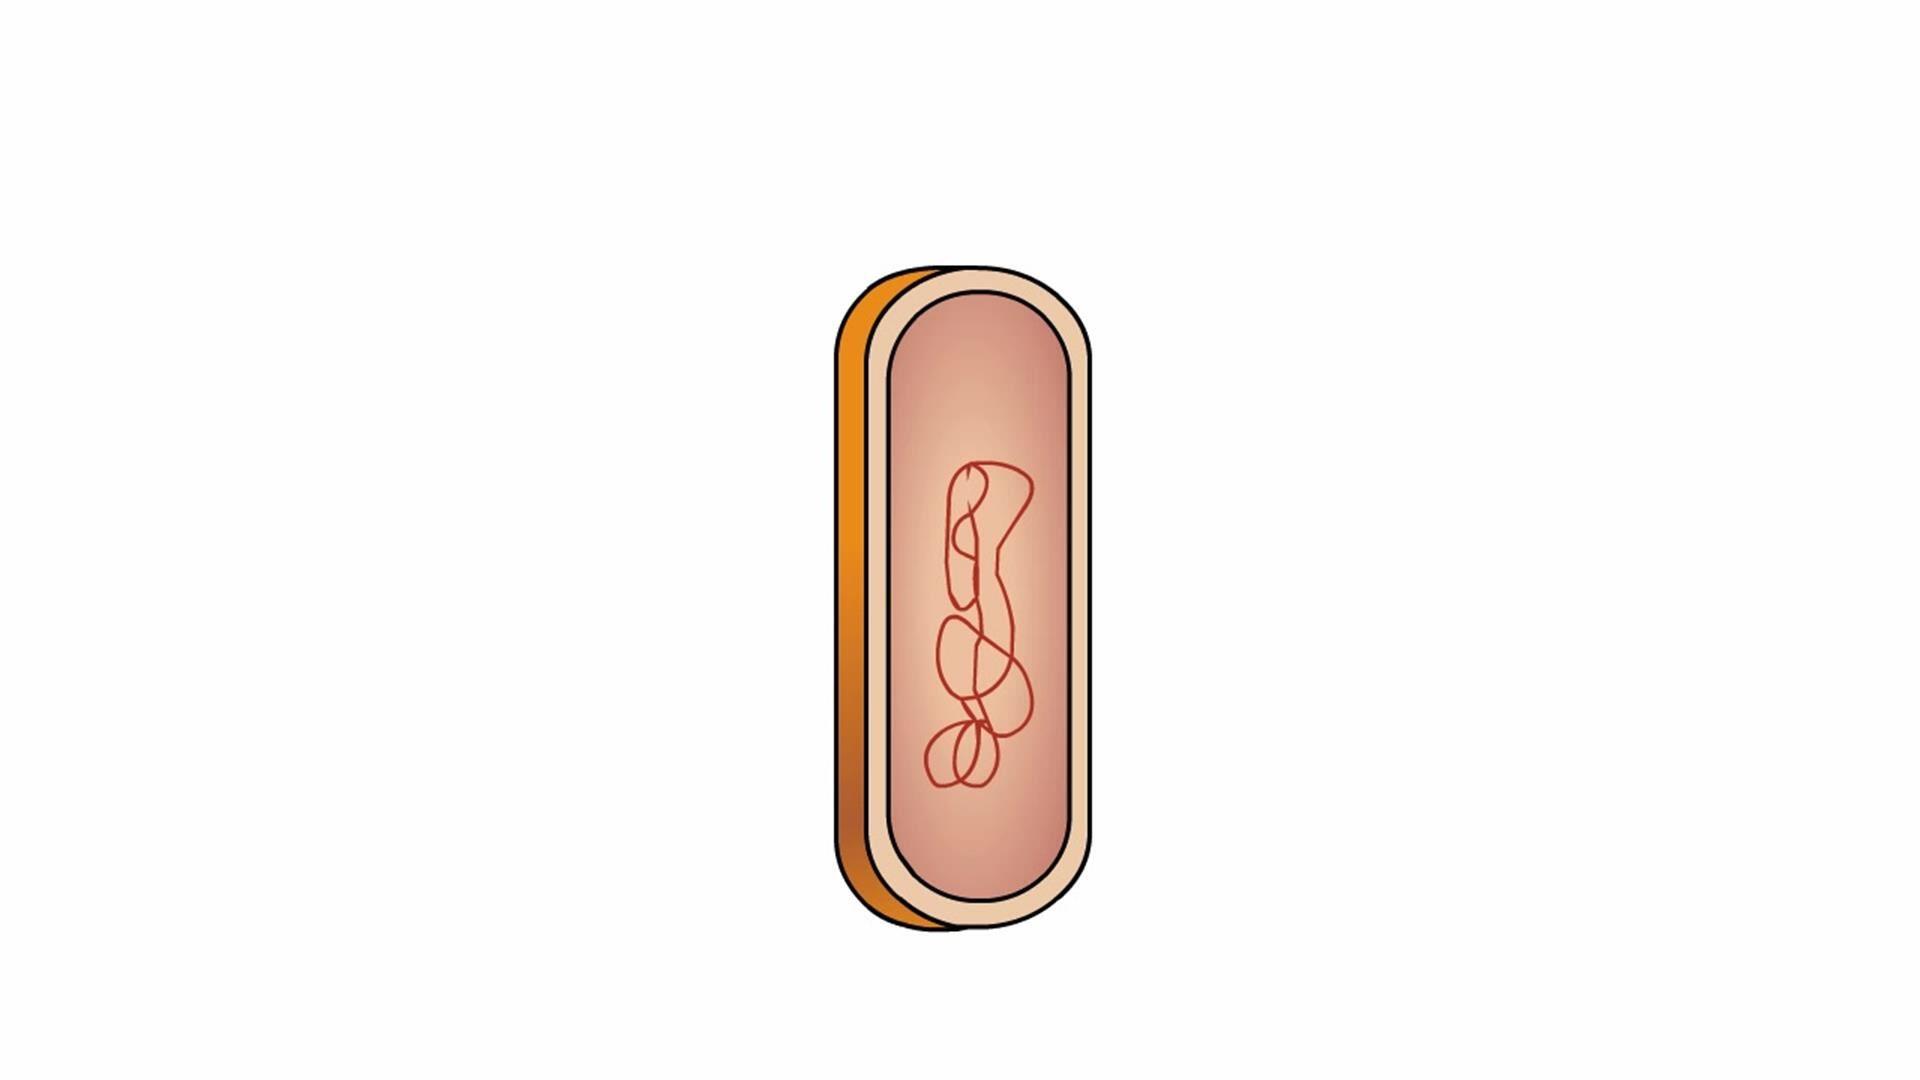 bacterial conjugation animation